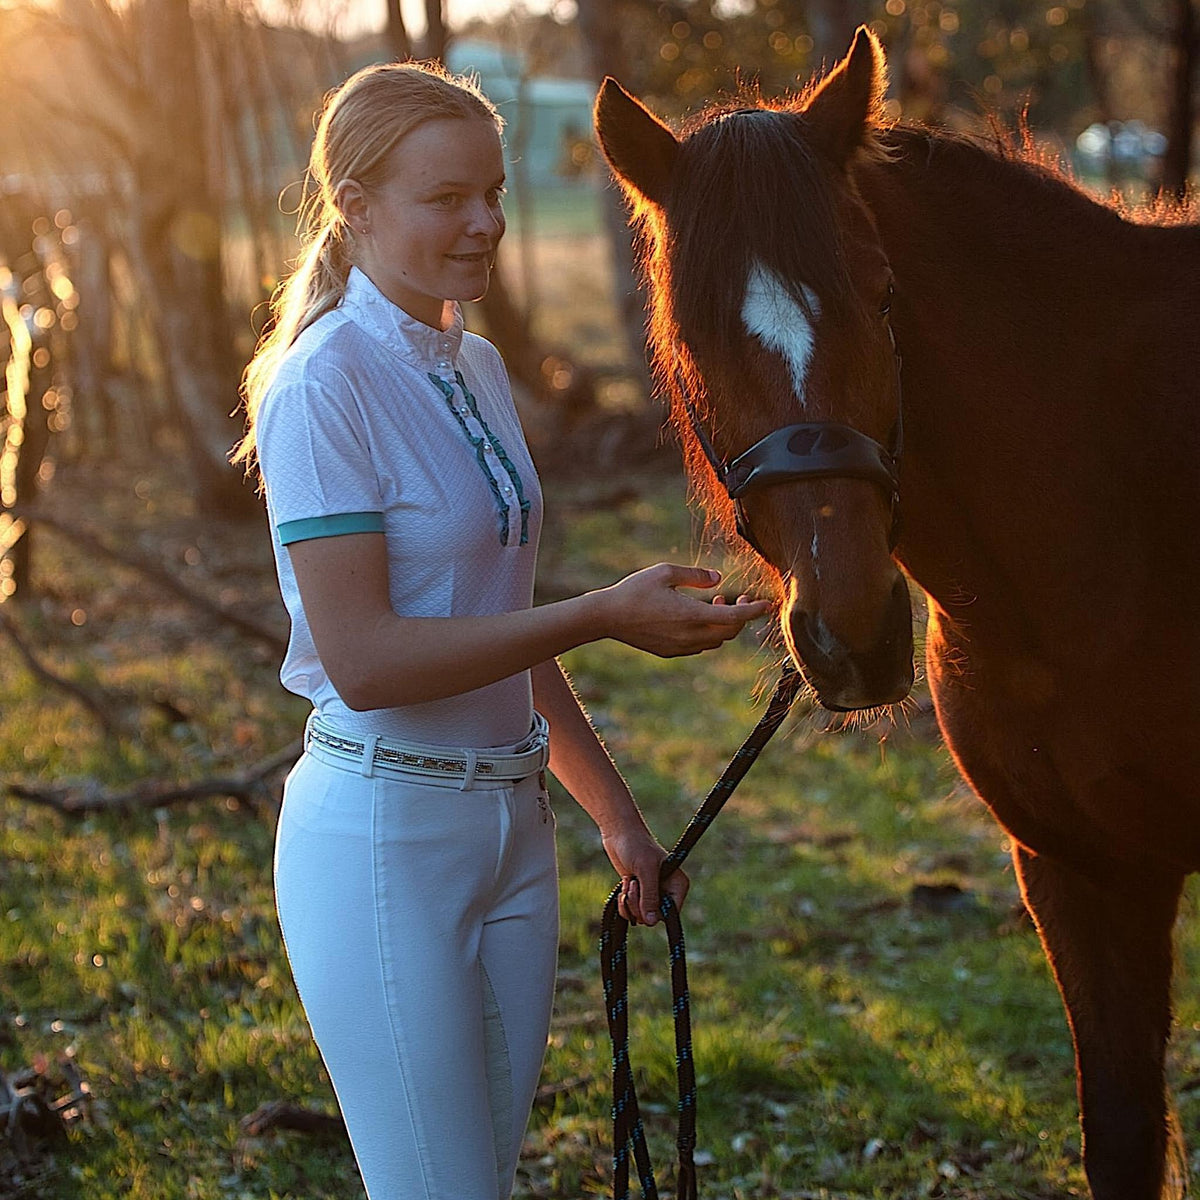 Lady holding horse, wearing white show shirt with turquoise cuffs and frills.